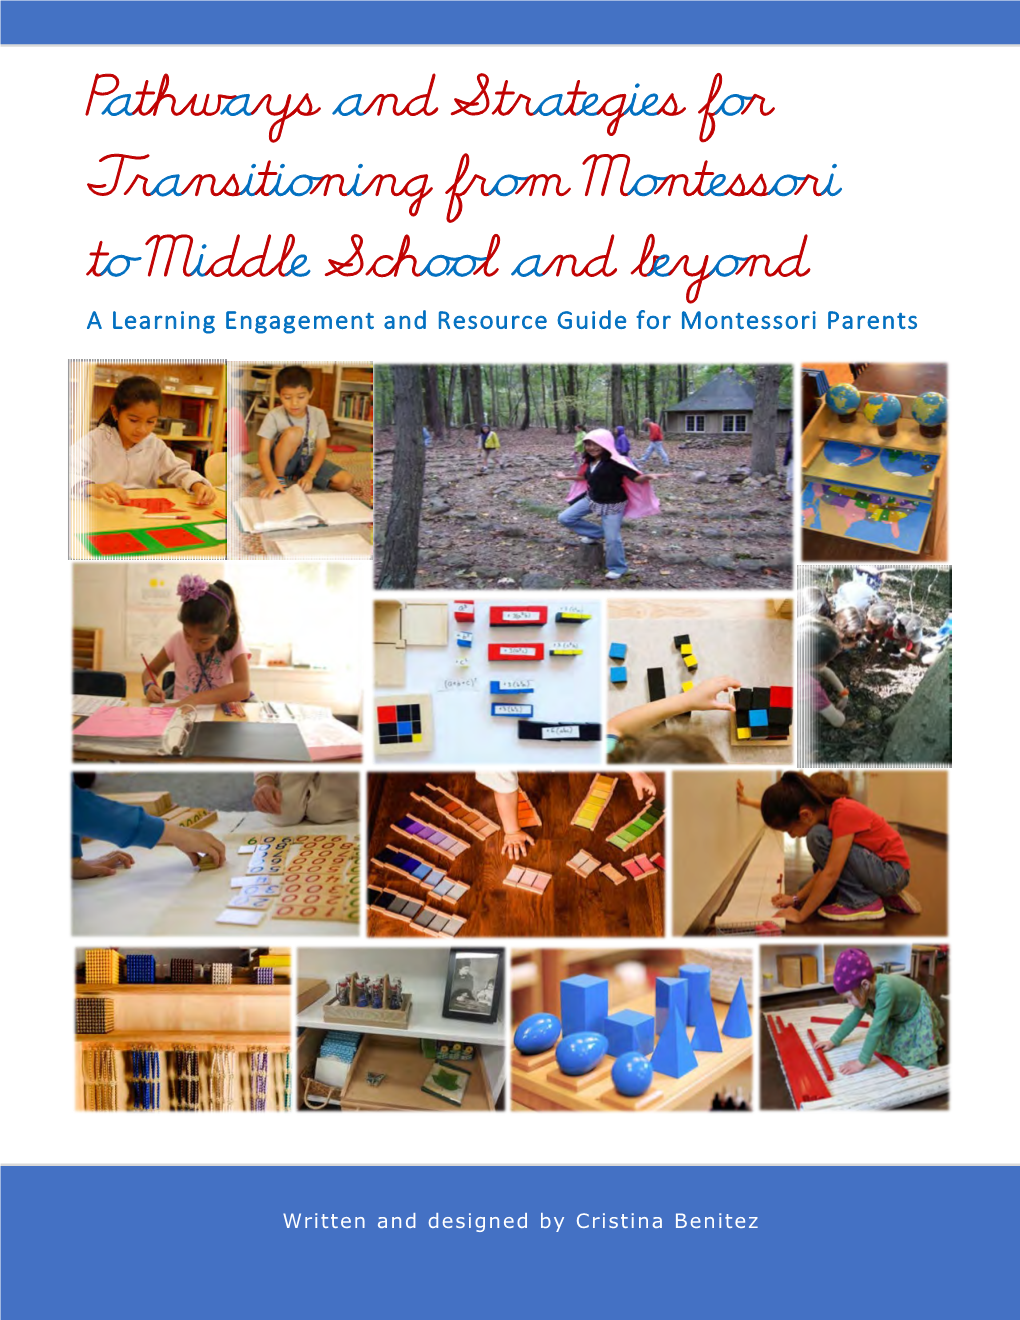 Pathways and Strategies for Transitioning from Montessori to Middle School and Beyond a Learning Engagement and Resource Guide for Montessori Parents